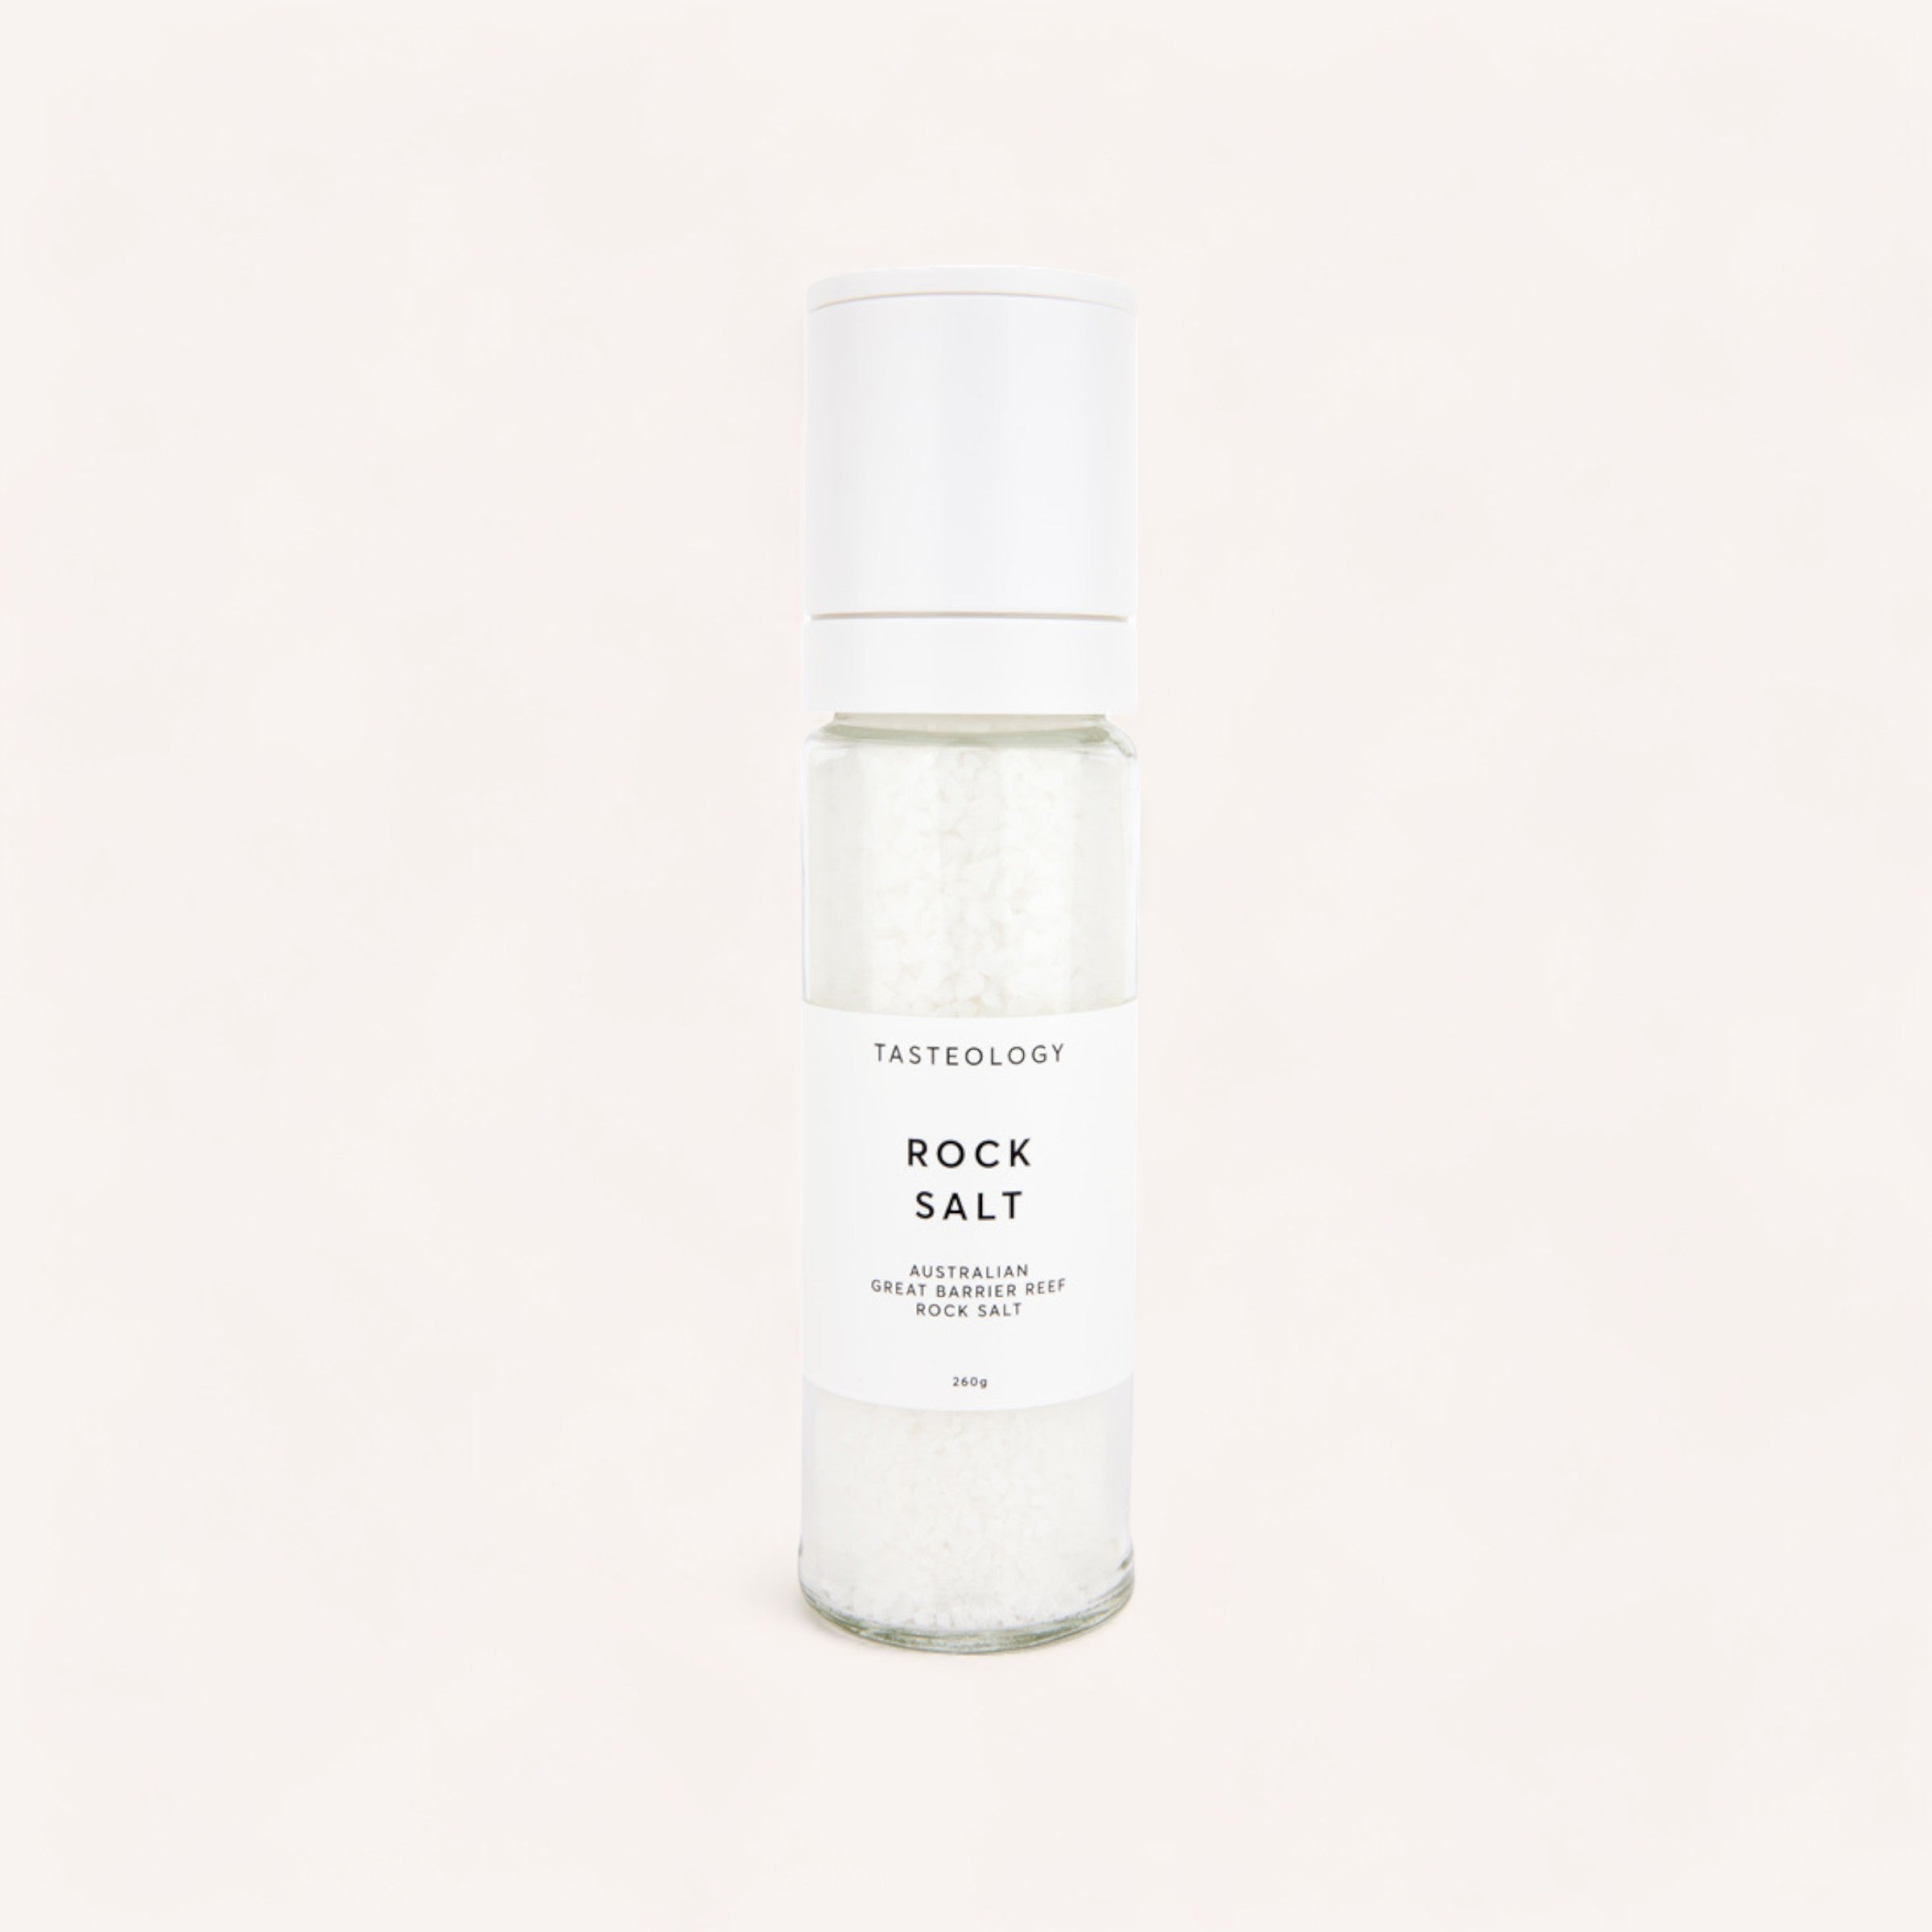 A minimalist-designed bottle of Great Barrier Reef Rock Salt by Tasteology against a clean, off-white background.